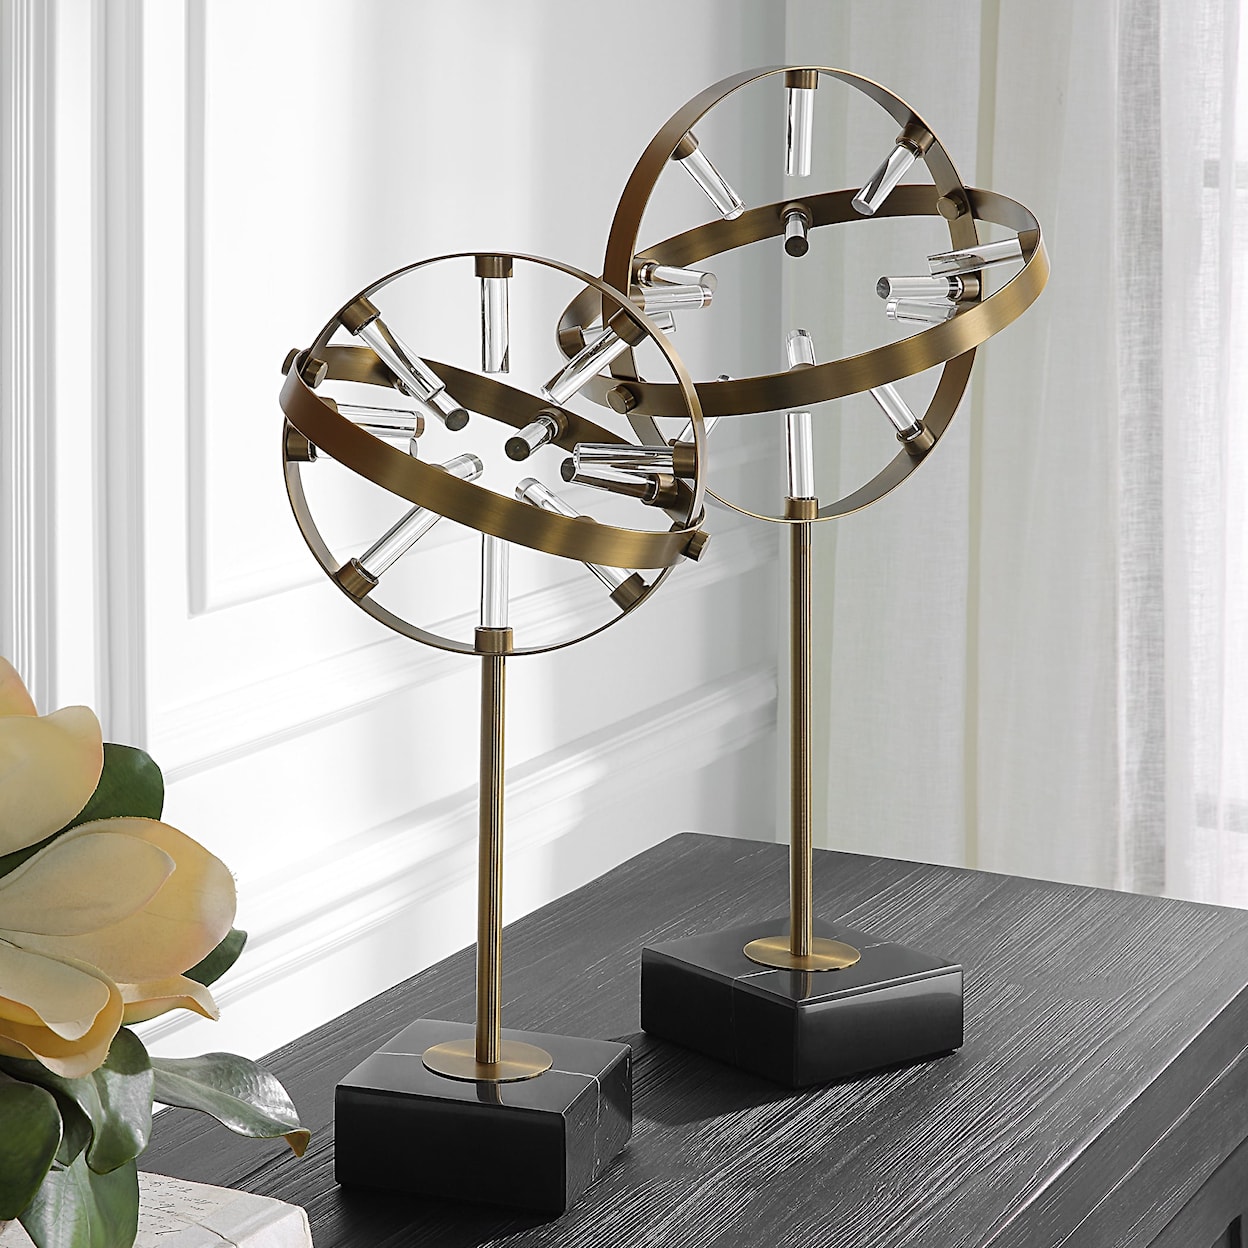 Uttermost Realm Realm Spherical Brass Sculptures Set Of 2